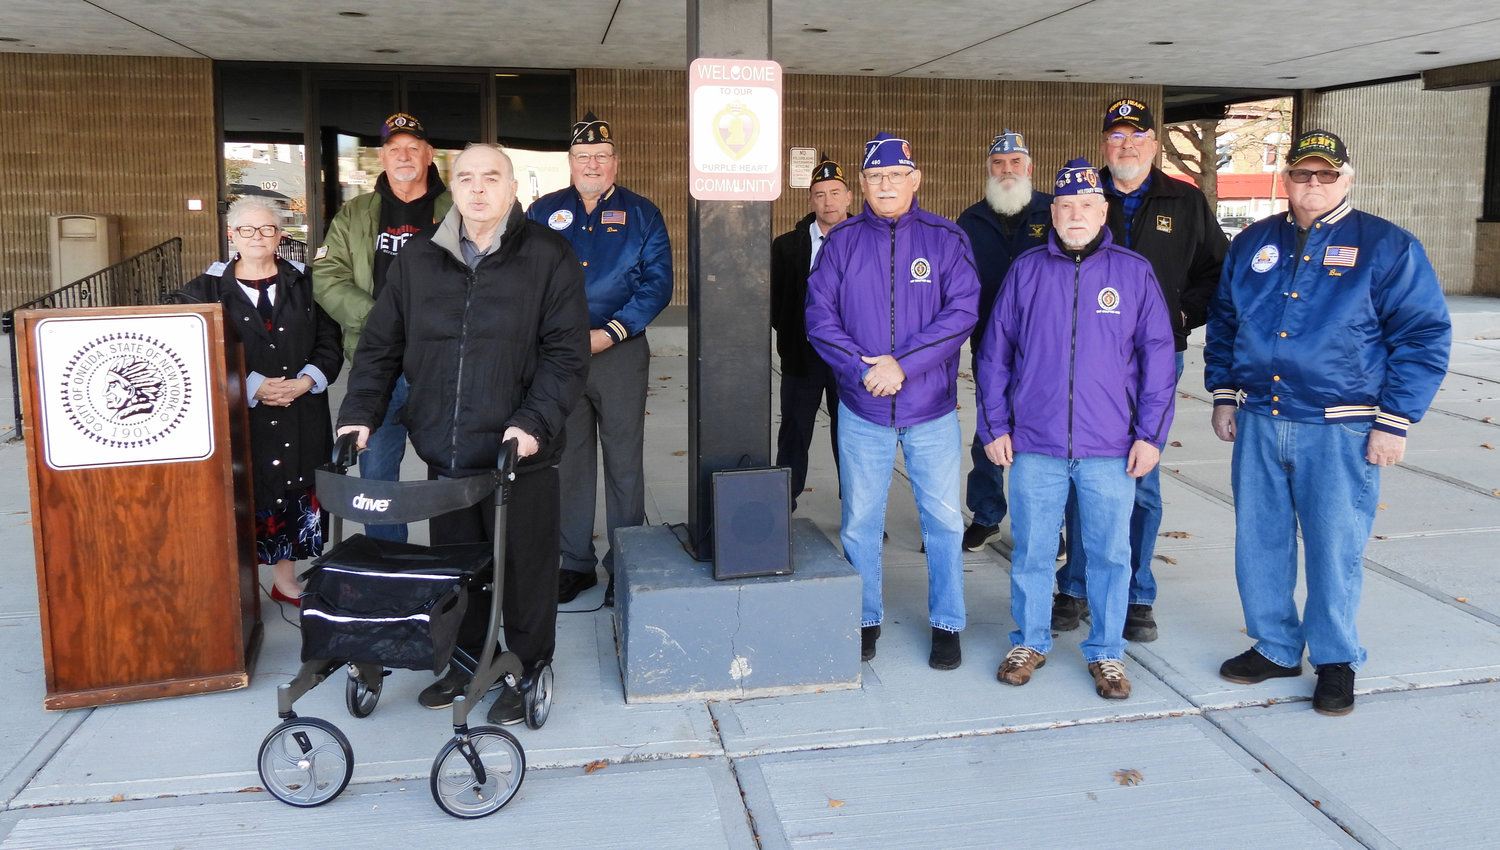 A dedication ceremony was held Monday, where Mayor Helen Acker and local veterans came together to highlight the city’s inclusion as a Purple Heart City.